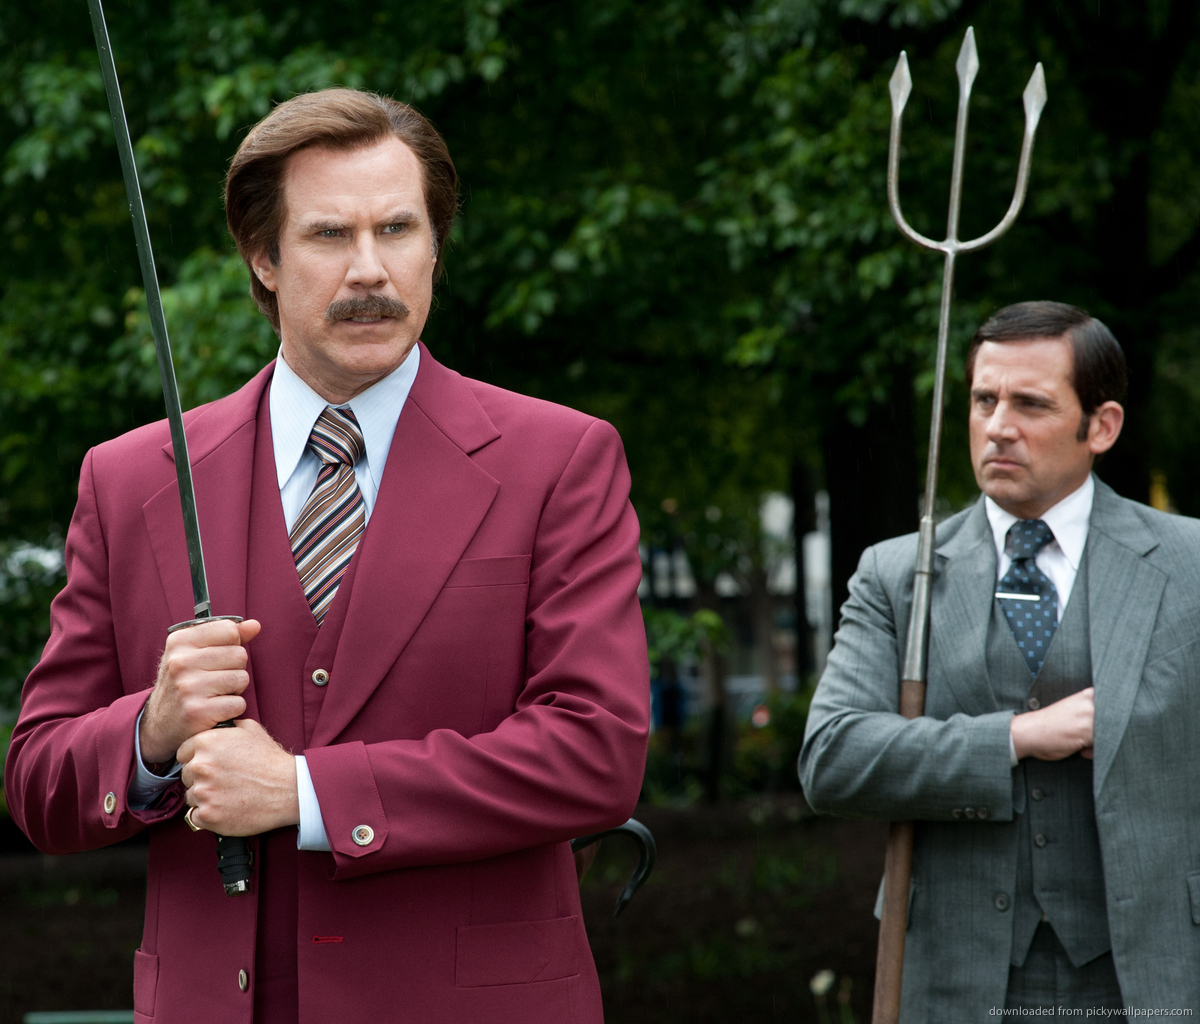 Download Anchorman 2 Ron Burgundy And Brick Tamland Wallpaper For